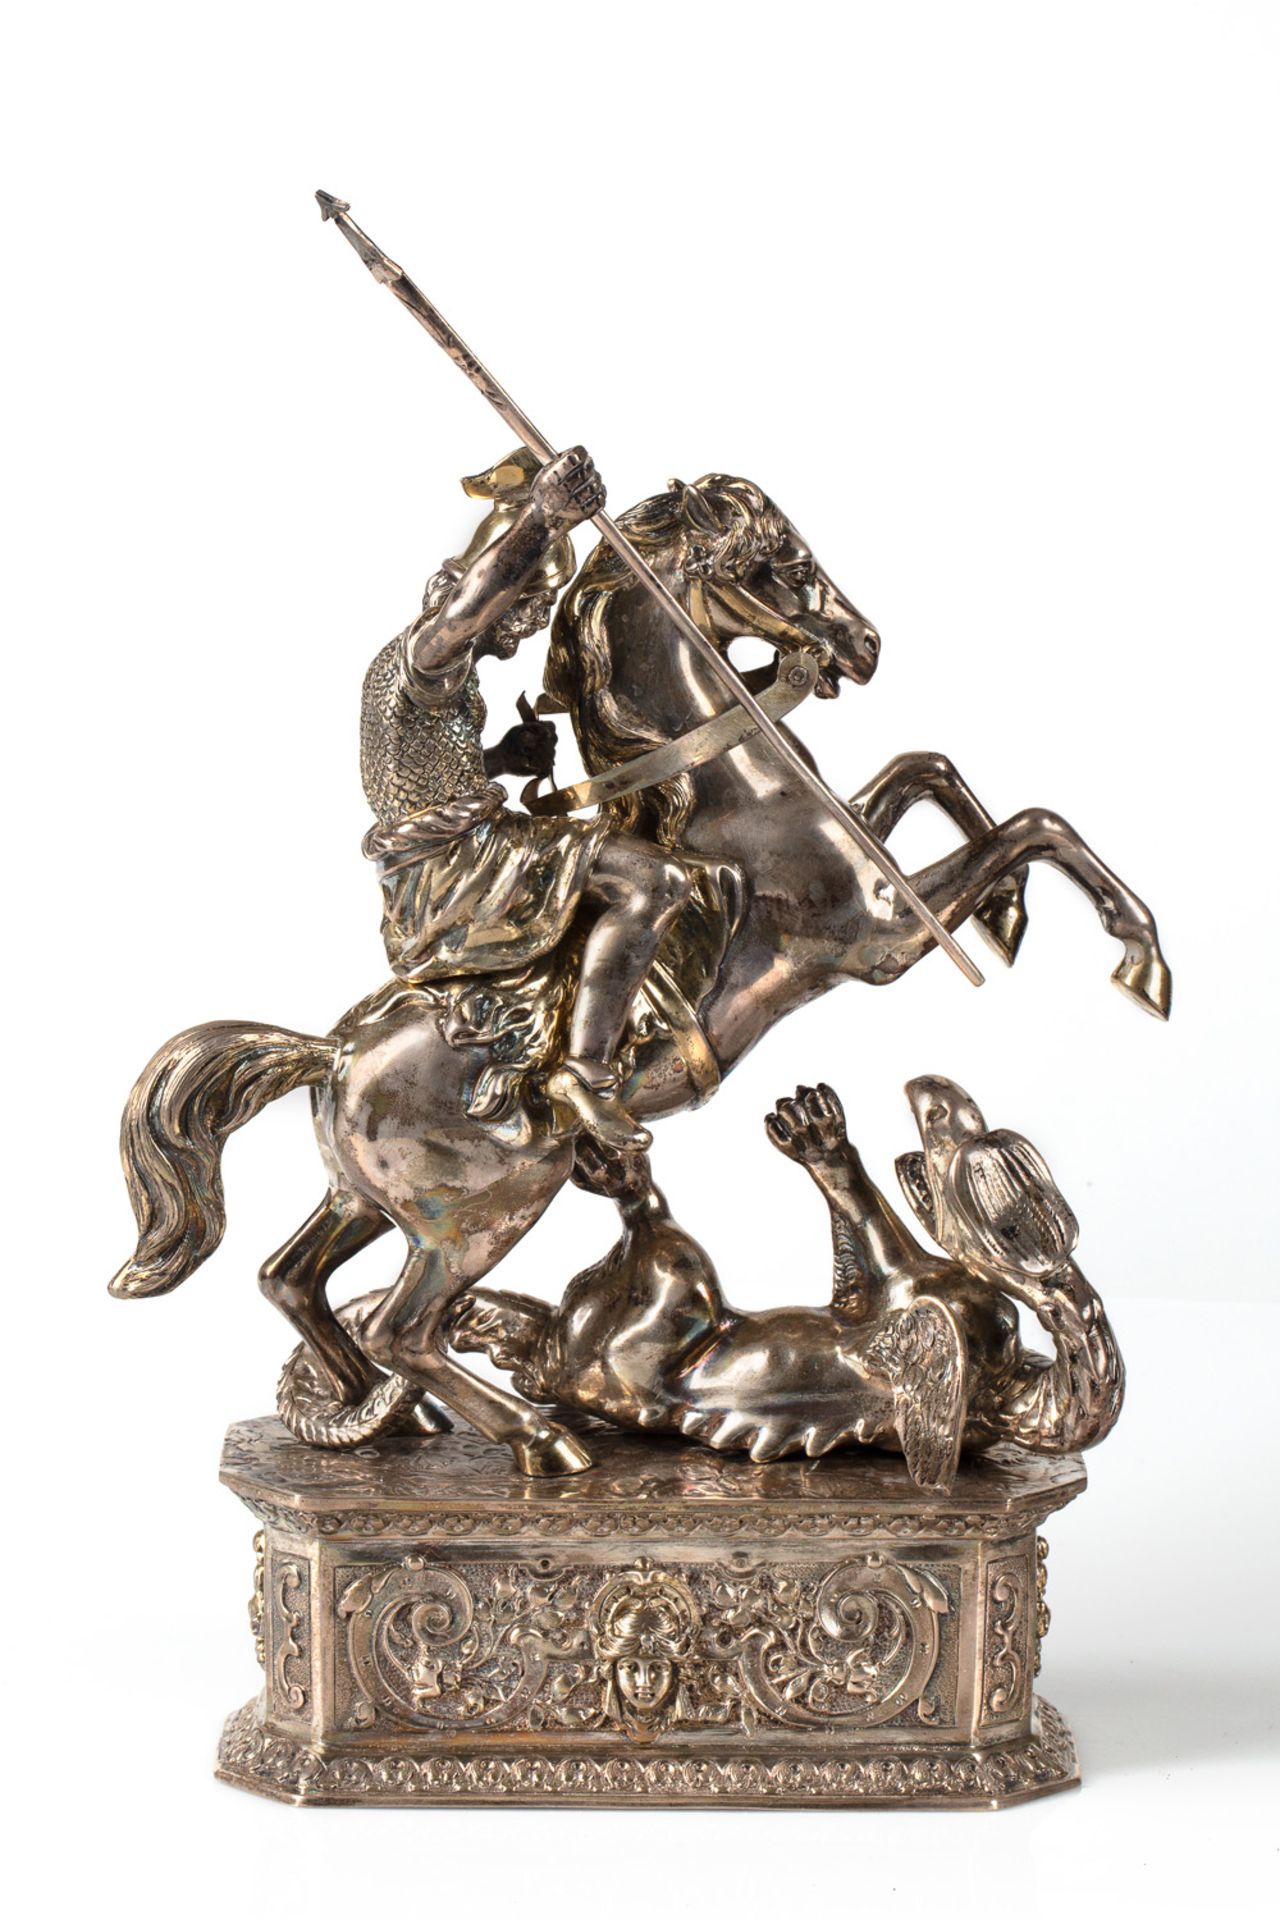 A EUROPEAN SILVER-PLATED FIGURE OF ST. GEORGE SLAYING THE DRAGON, LATE 19TH-EARLY 20TH CENTURY